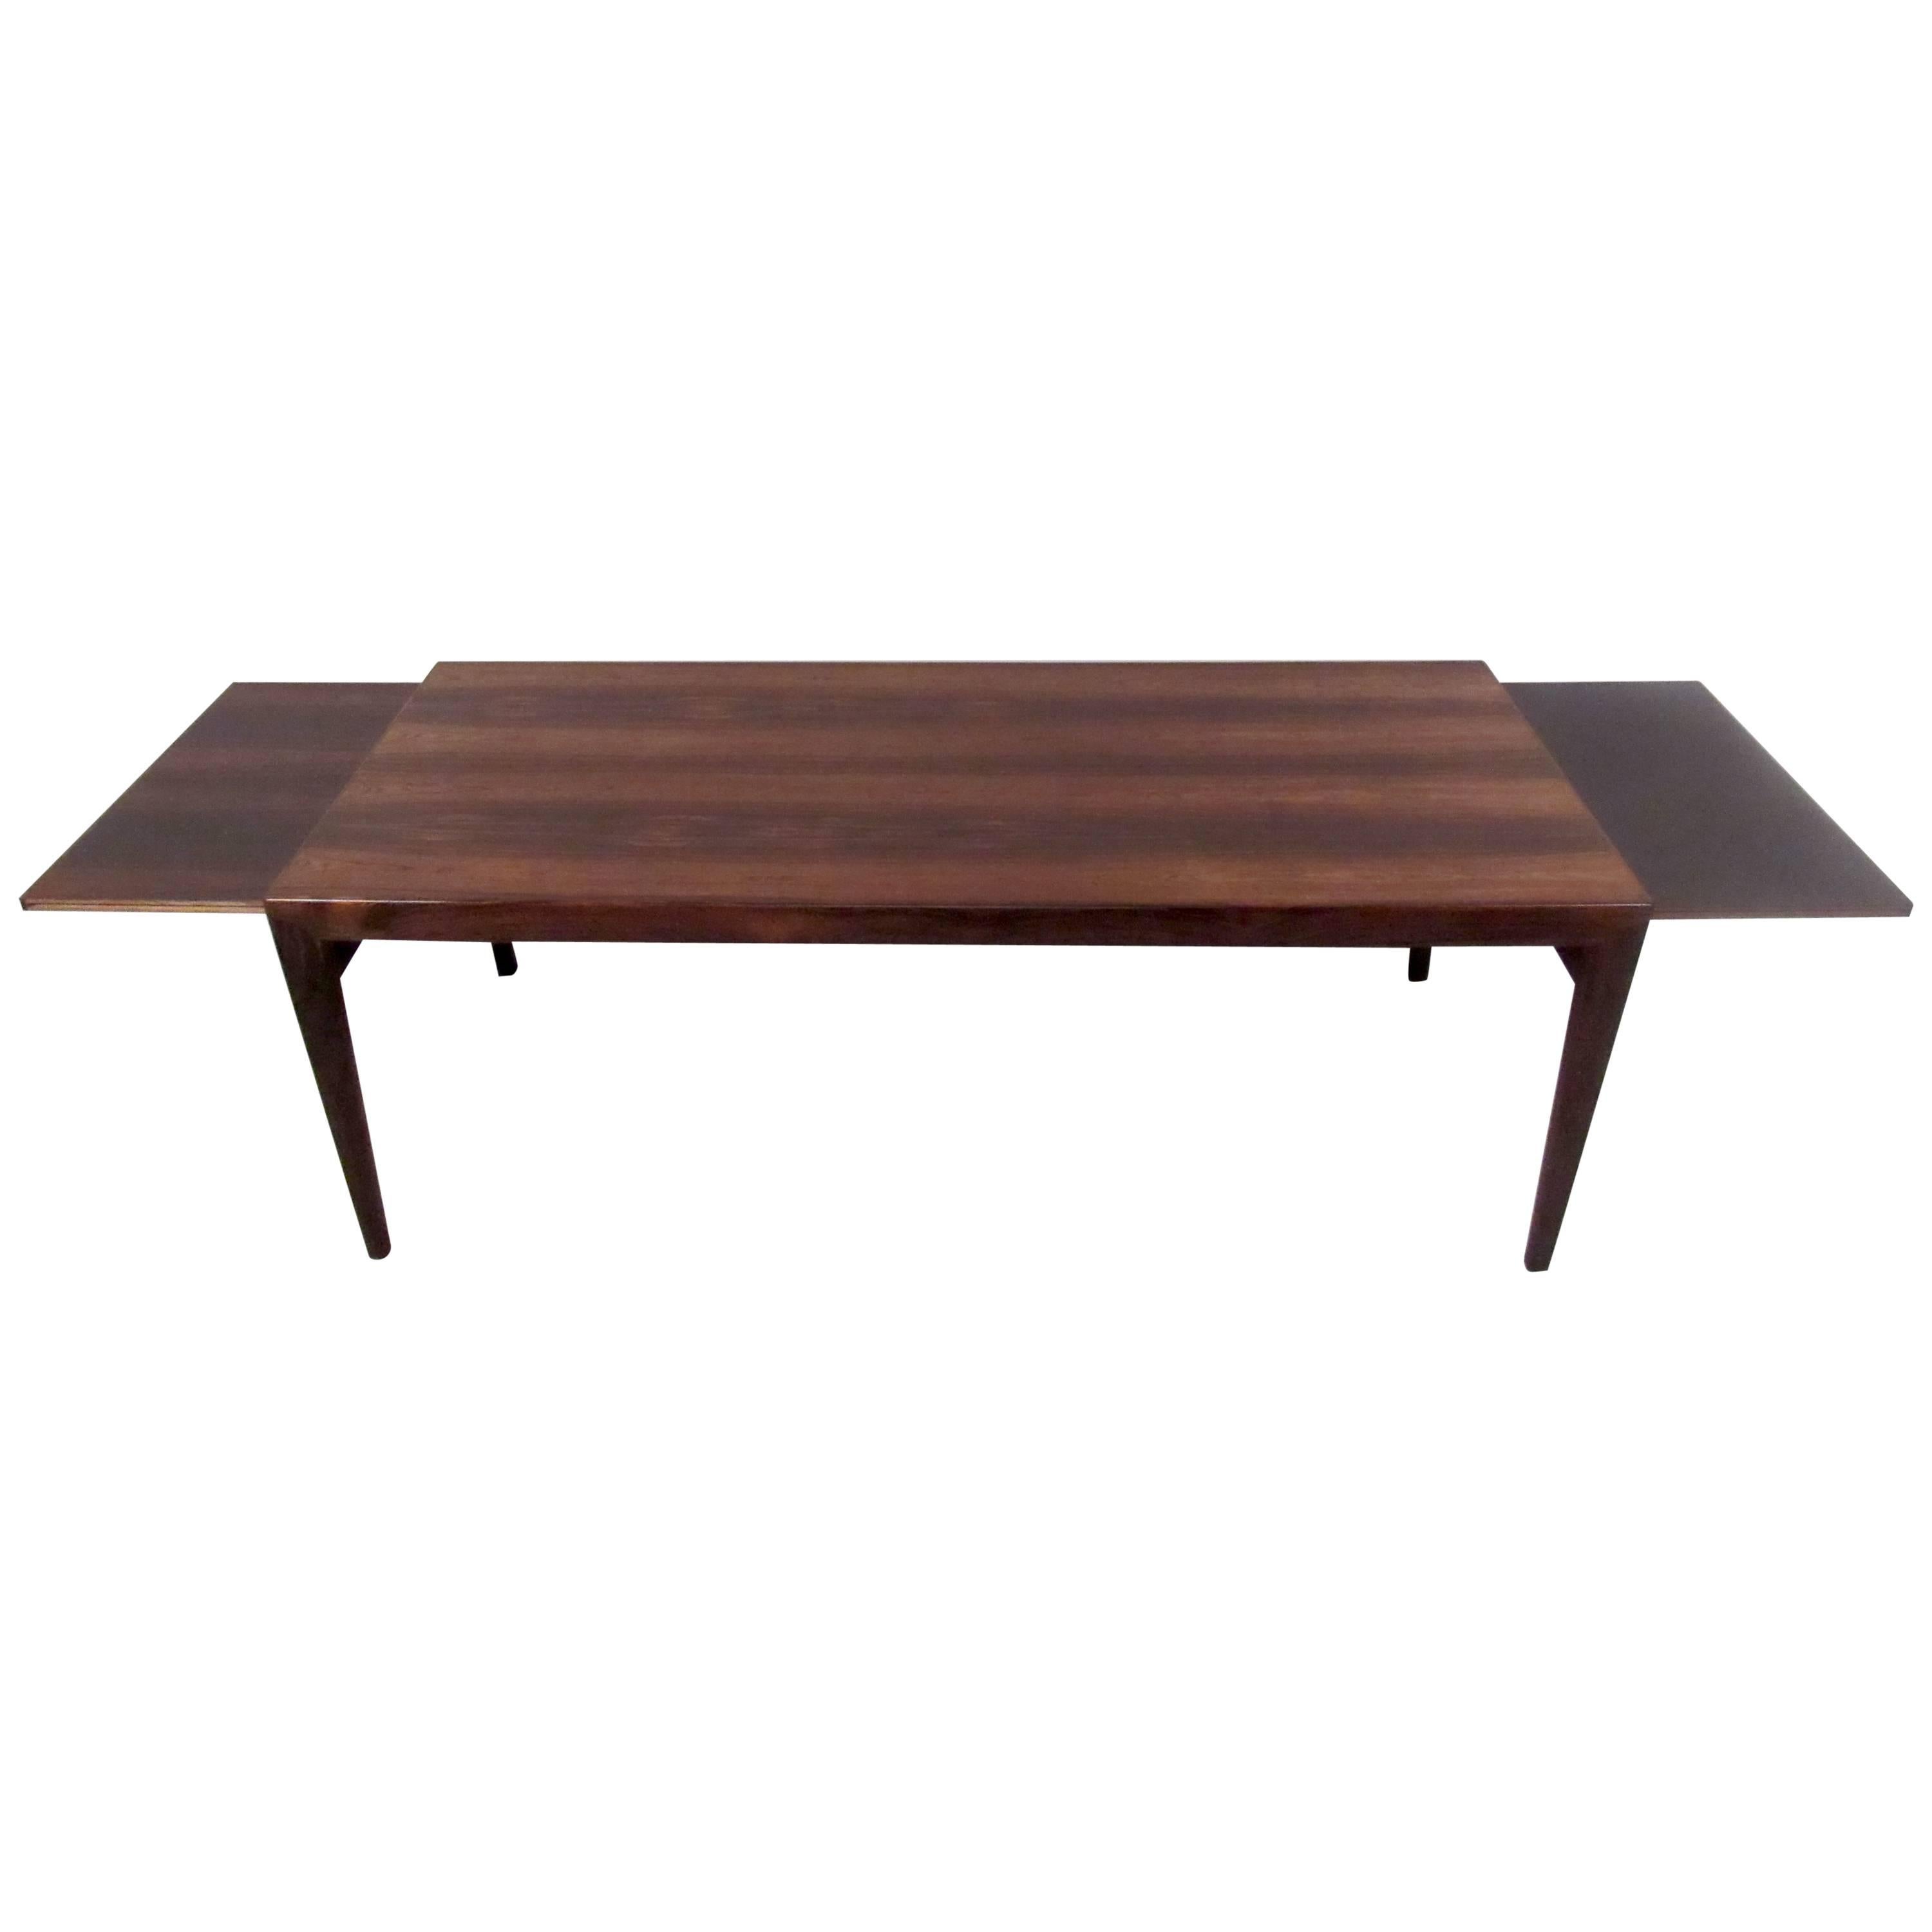 Vintage-modern coffee table featuring two-draw leaves and beautiful rosewood grain, designed by Johannes Anderson.

